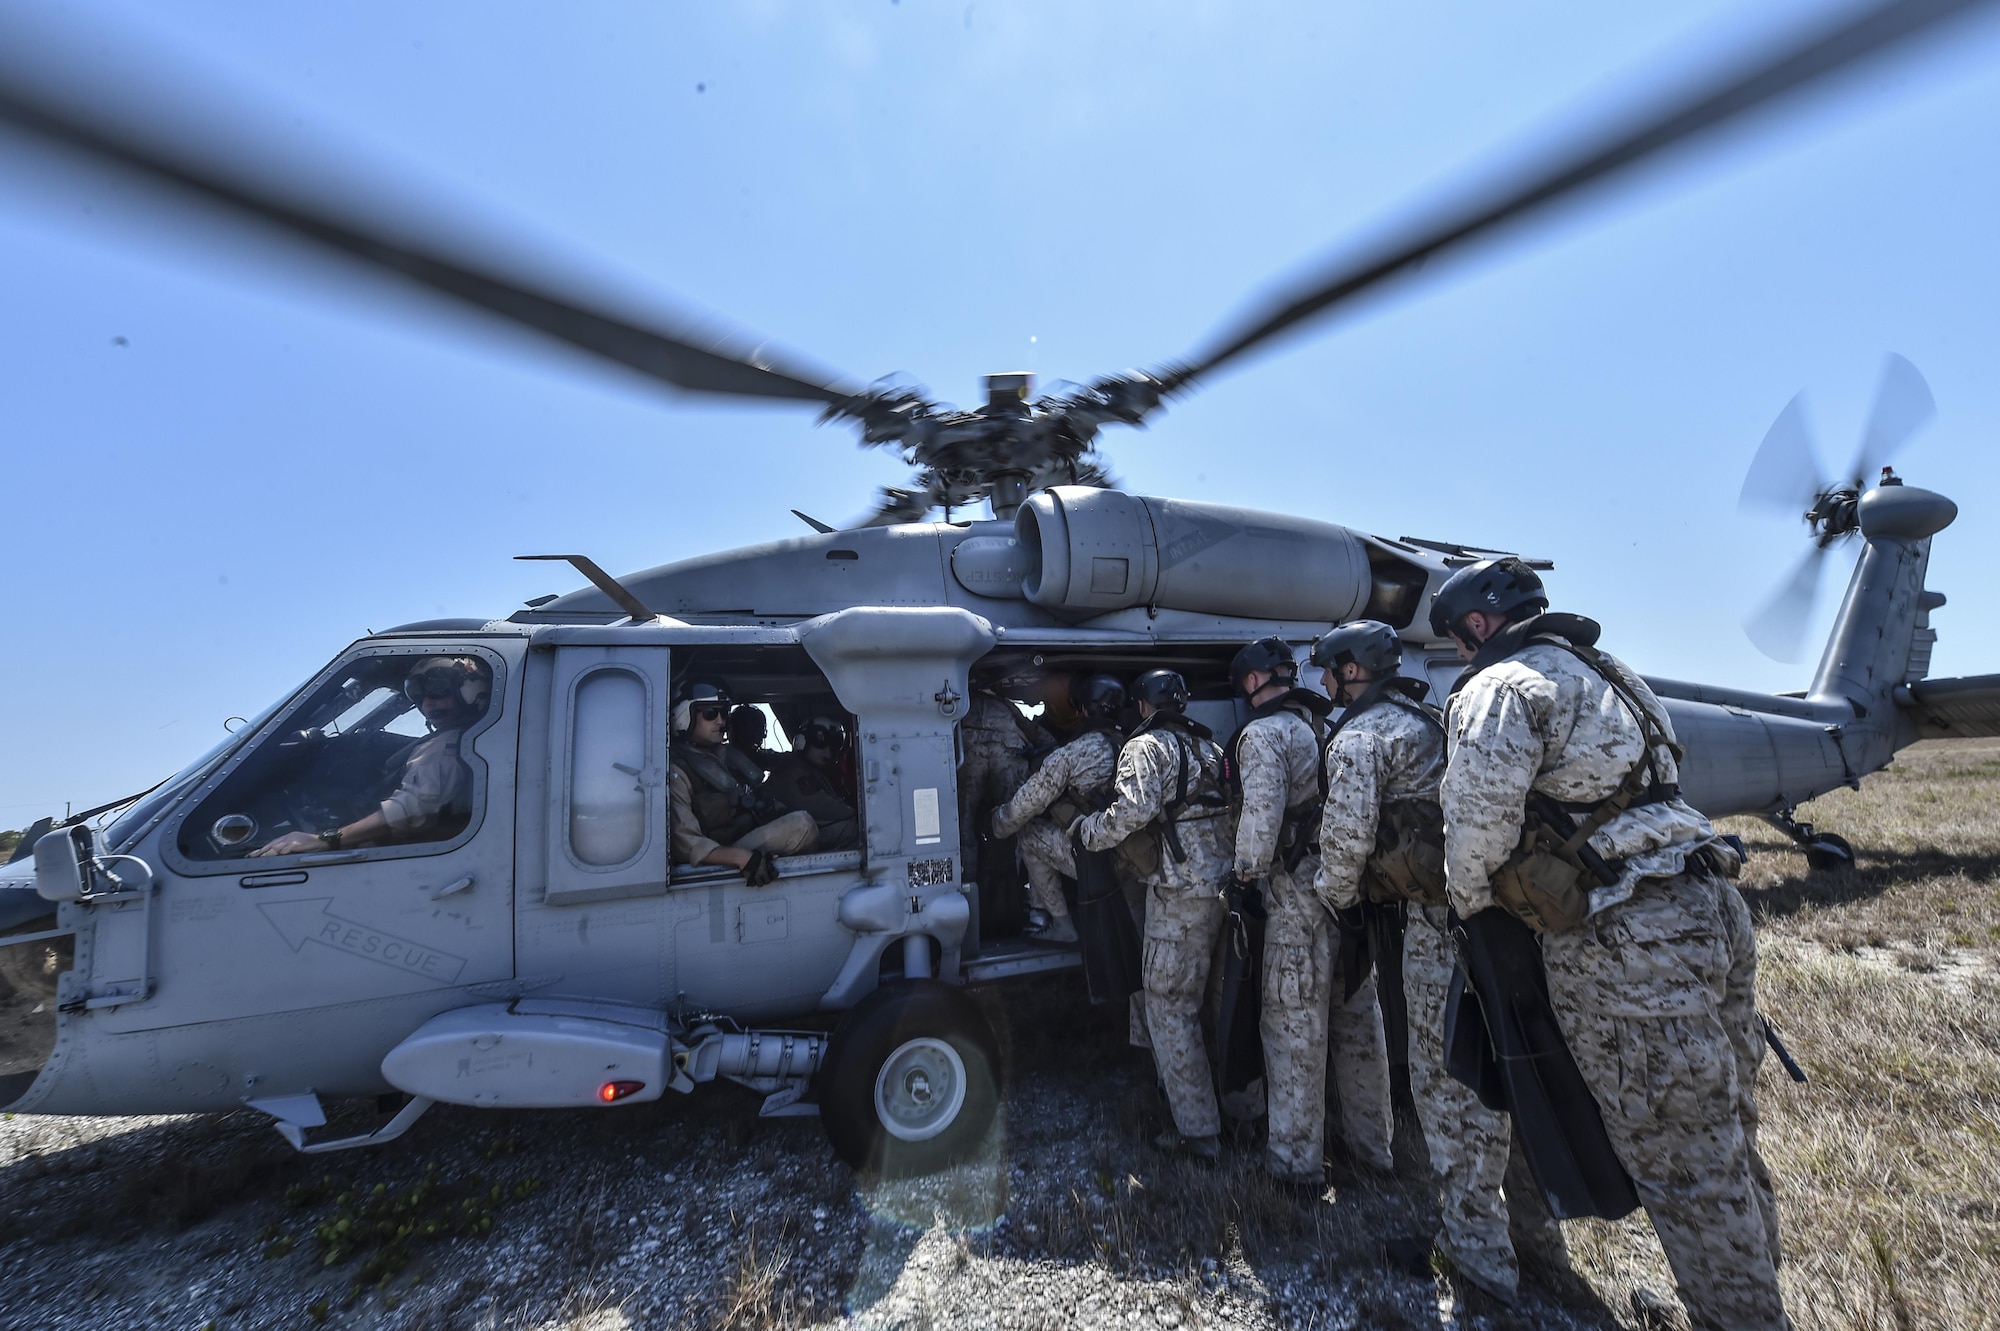 Marine Special Operations School Individual Training Course students load onto a U.S. Navy SH-60 Seahawk Helicopter for helocasting training, March 23, 2017, at Key West, Fla. For the first time, U.S. Air Force Special Tactics Airmen spent three months in Marine Special Operations Command’s Marine Raider training pipeline, representing efforts to build joint mindsets across special operations forces.  (U.S. Air Force photo by Senior Airman Ryan Conroy)